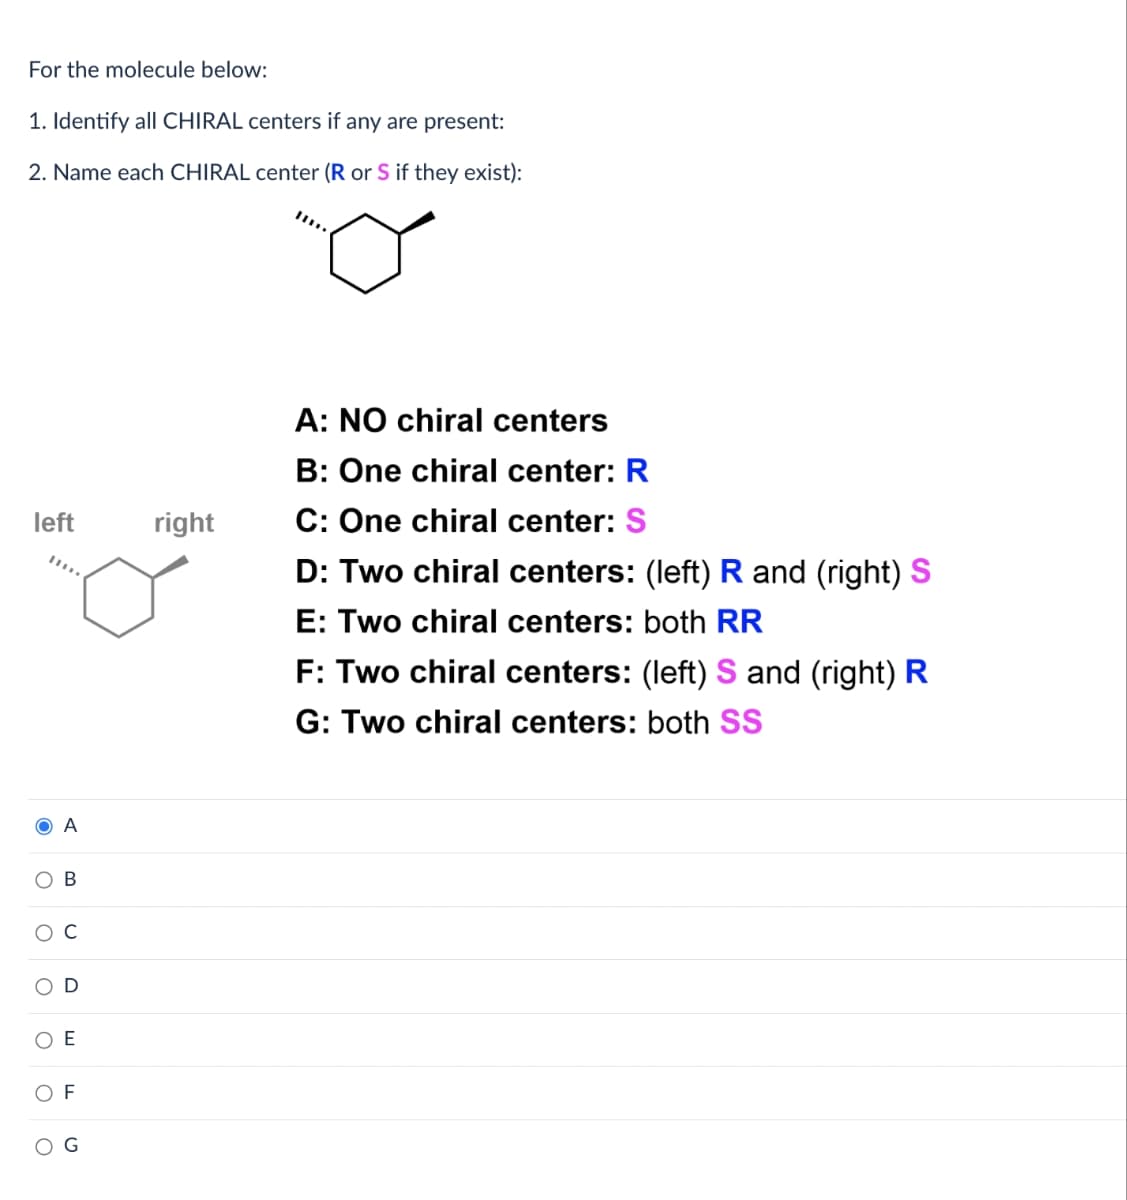 For the molecule below:
1. Identify all CHIRAL centers if any are present:
2. Name each CHIRAL center (R or S if they exist):
left
O A
O
O
B
E
OF
right
A: NO chiral centers
B: One chiral center: R
C: One chiral center: S
D: Two chiral centers: (left) R and (right) S
E: Two chiral centers: both RR
F: Two chiral centers: (left) Sand (right) R
G: Two chiral centers: both SS